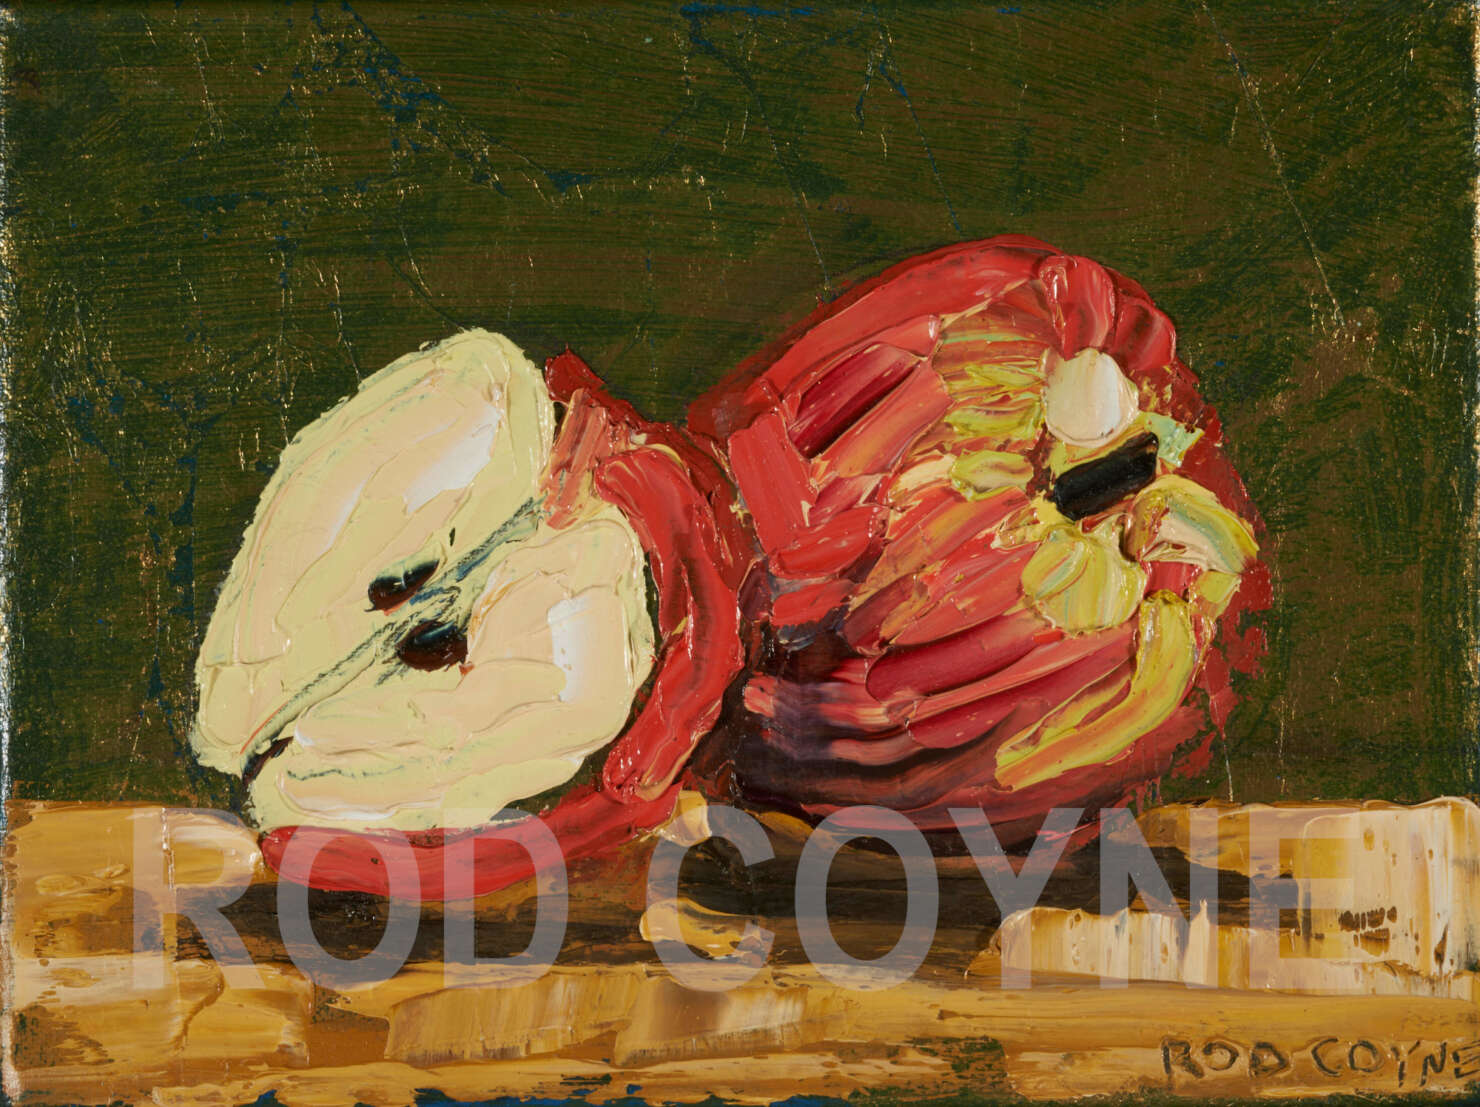 artist rod coyne's still life painting "apple still life" is shown here, watermarked.